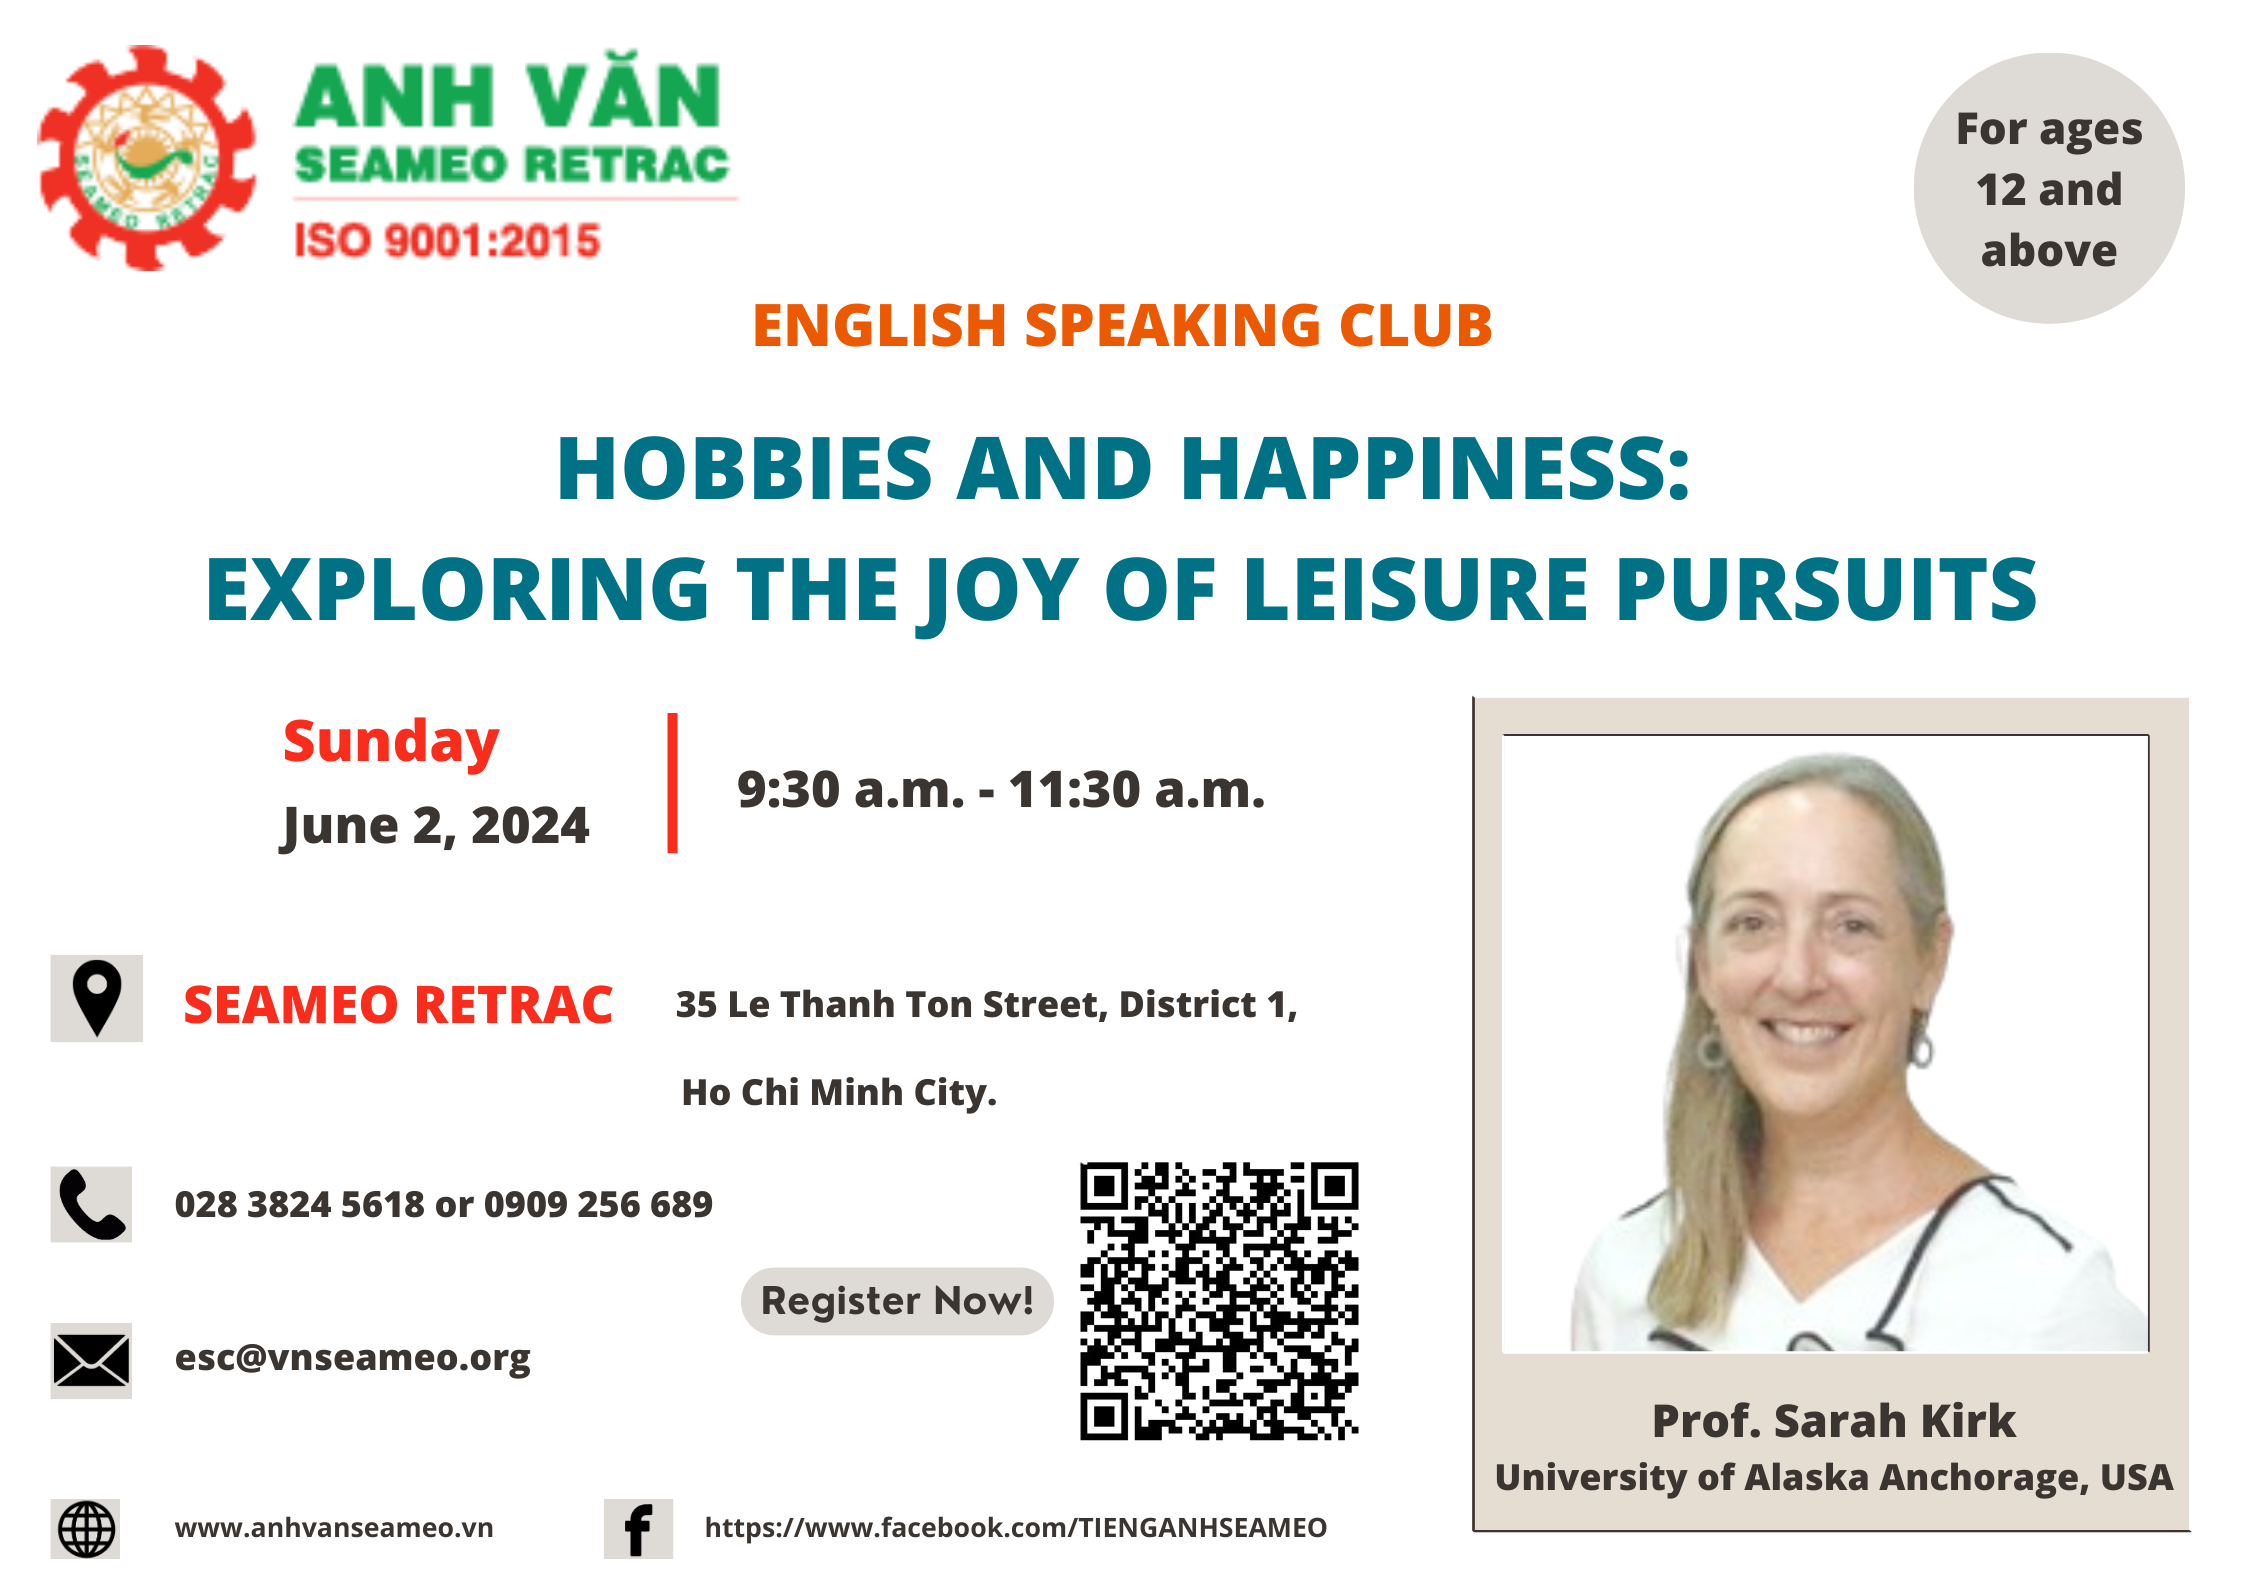 English Speaking Club: Topic: “Hobbies and Happiness: Exploring the Joy of Leisure Pursuits”